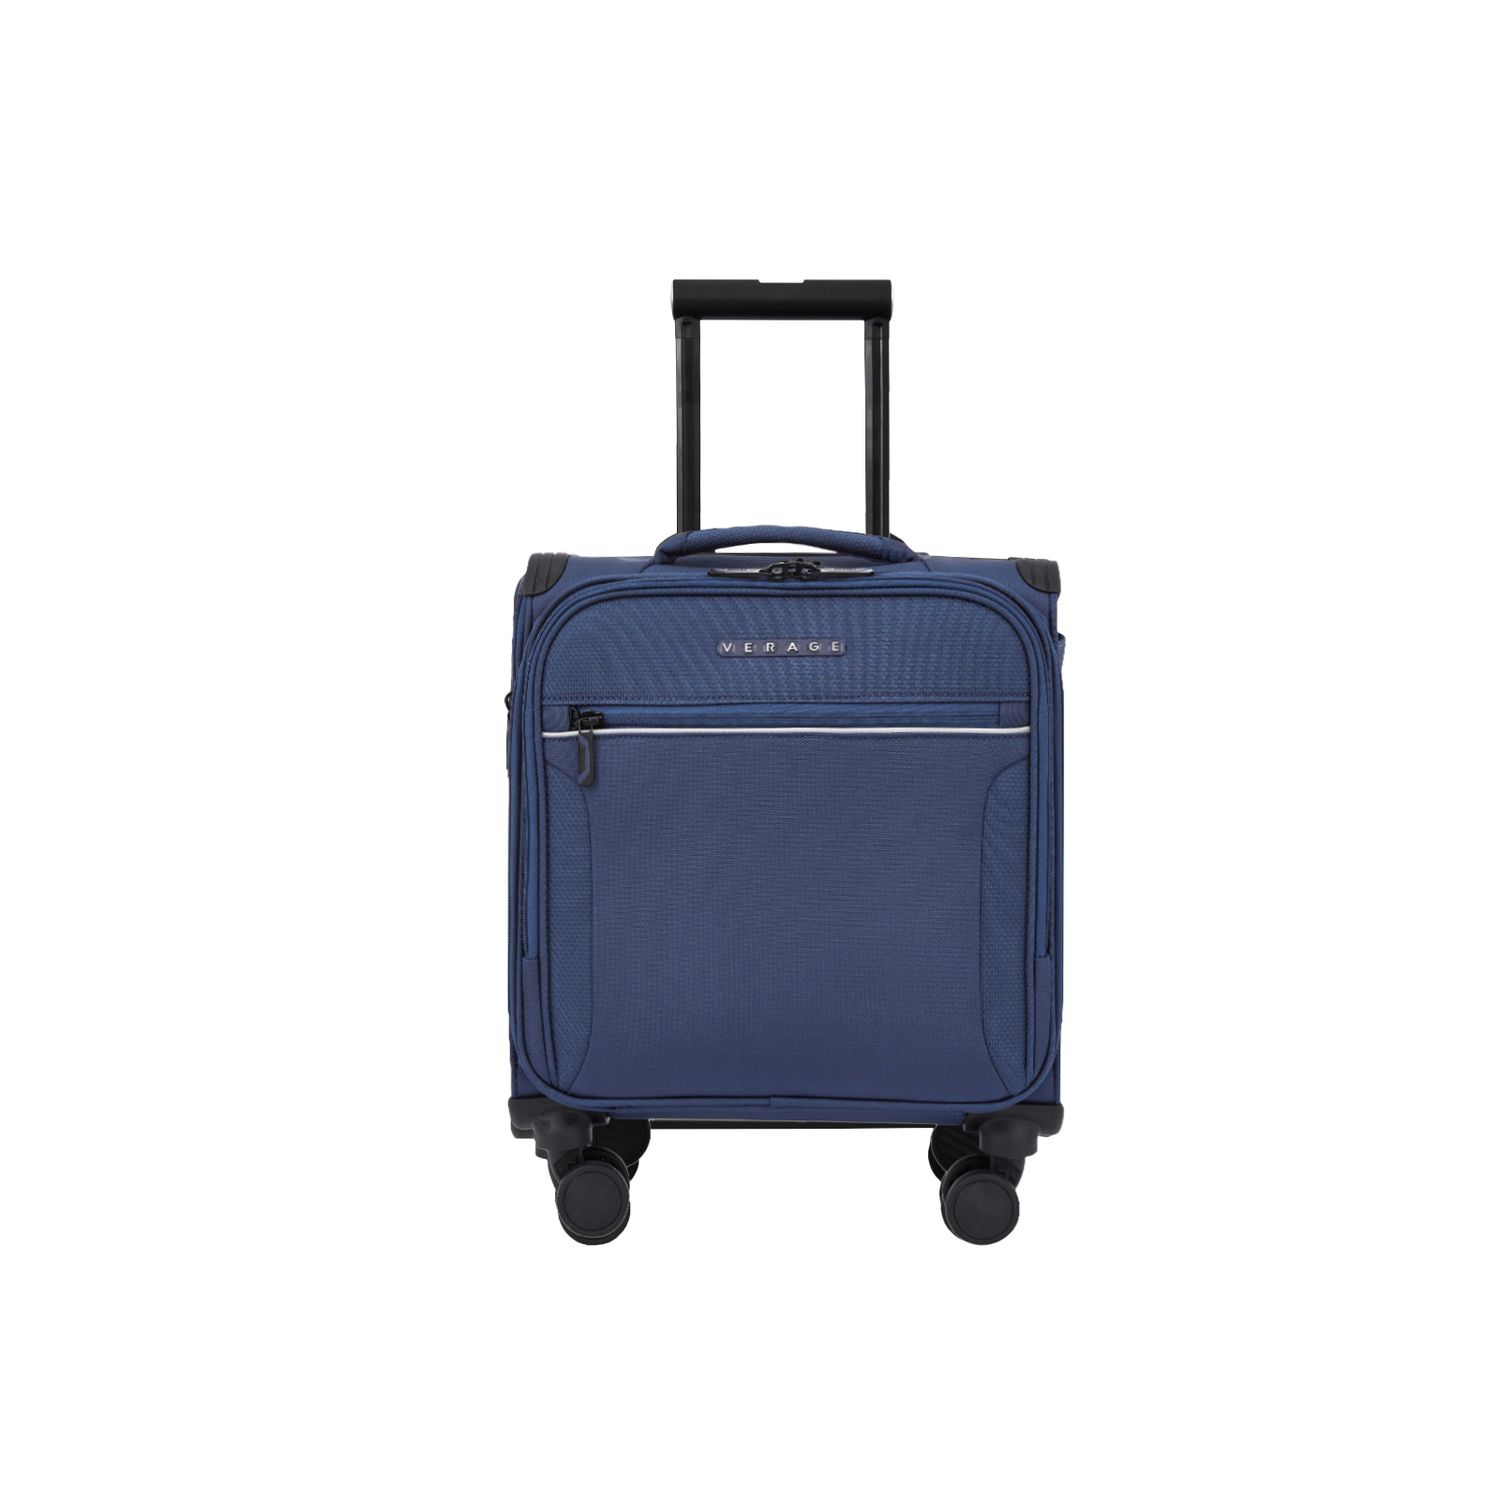 Small cabin suitcase 4 wheels